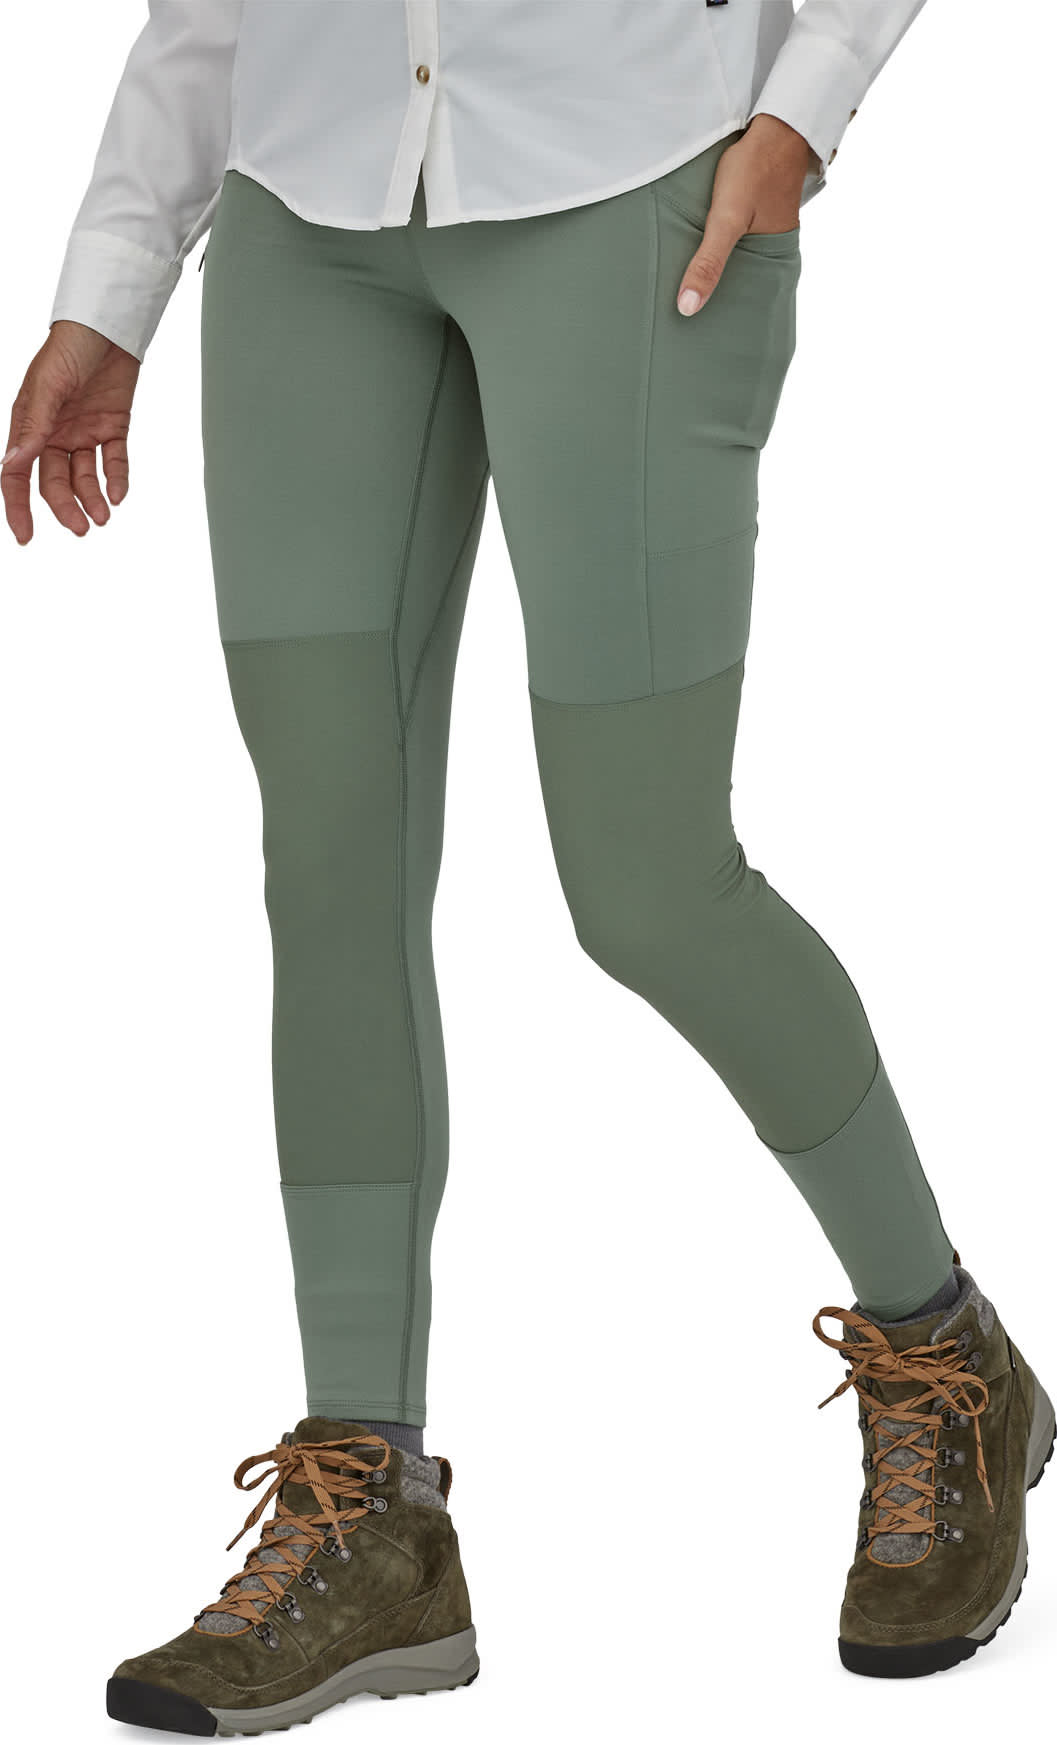 Women's Pack Out Hike Tights Hemlock Green, Buy Women's Pack Out Hike  Tights Hemlock Green here